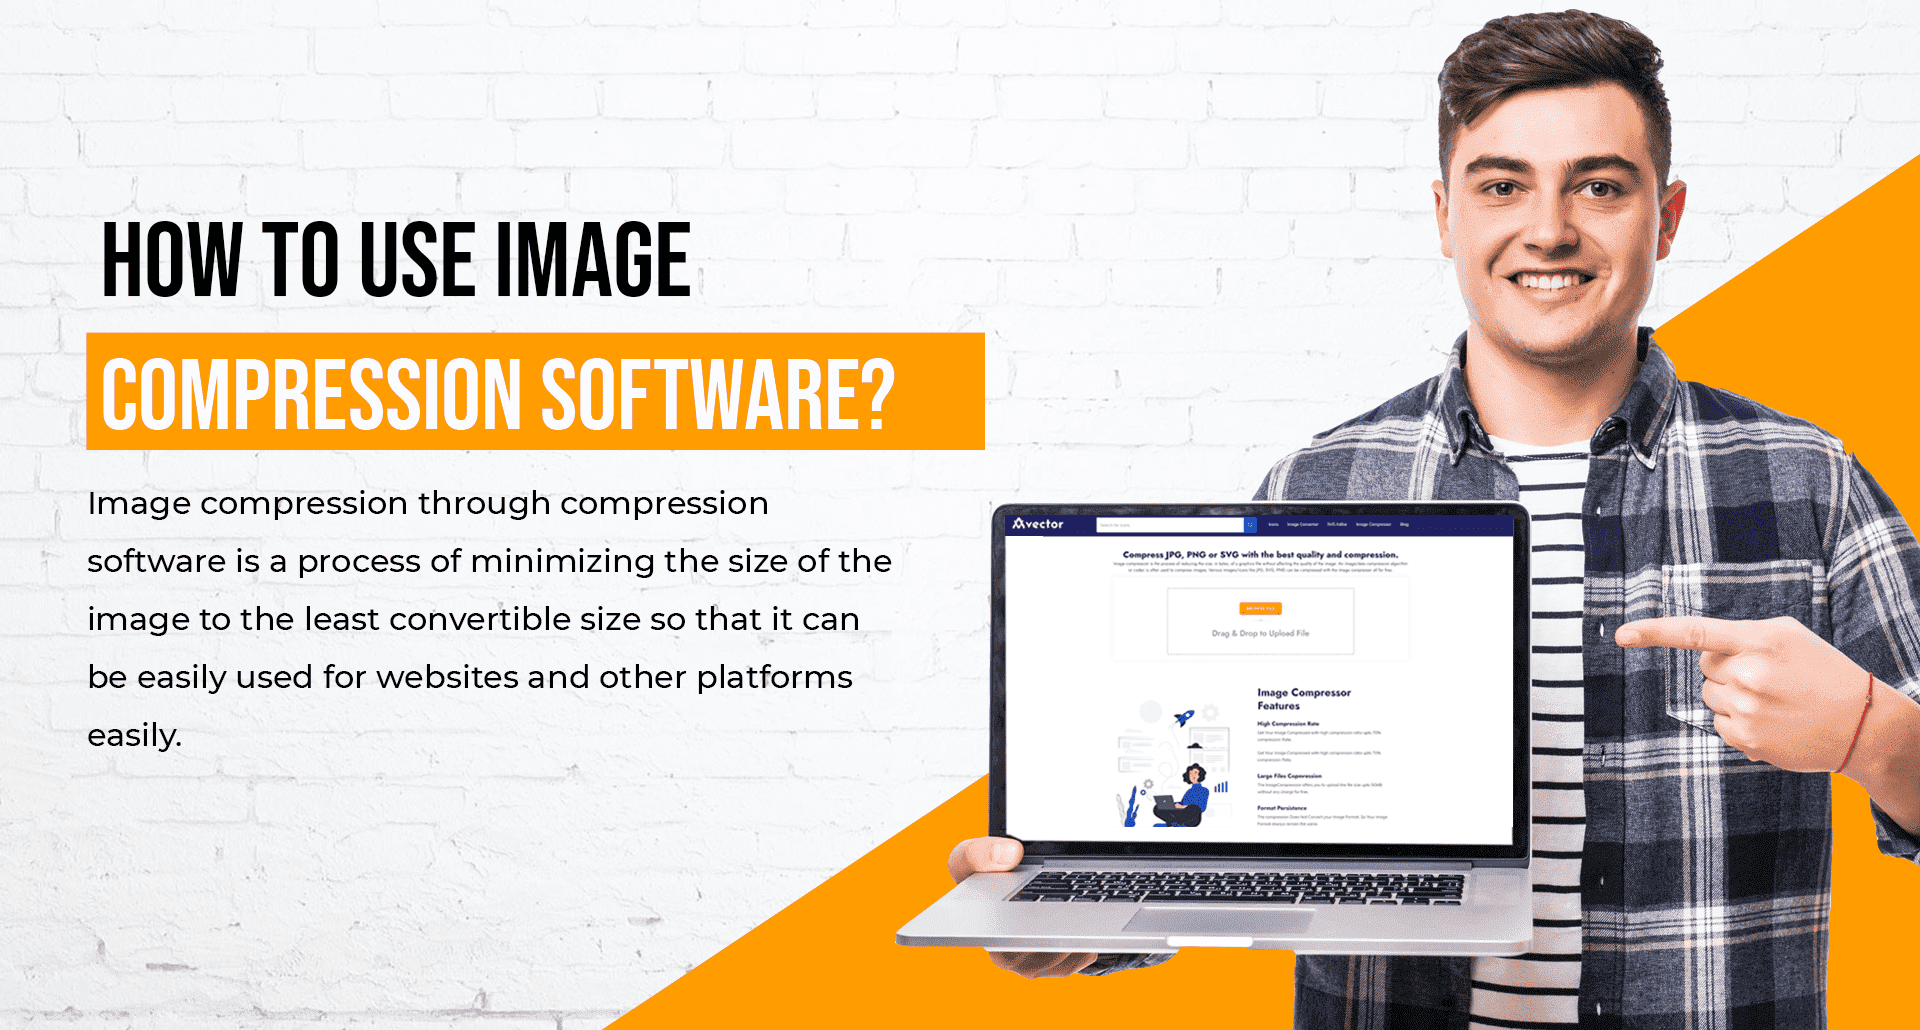 Use Image Compression Software